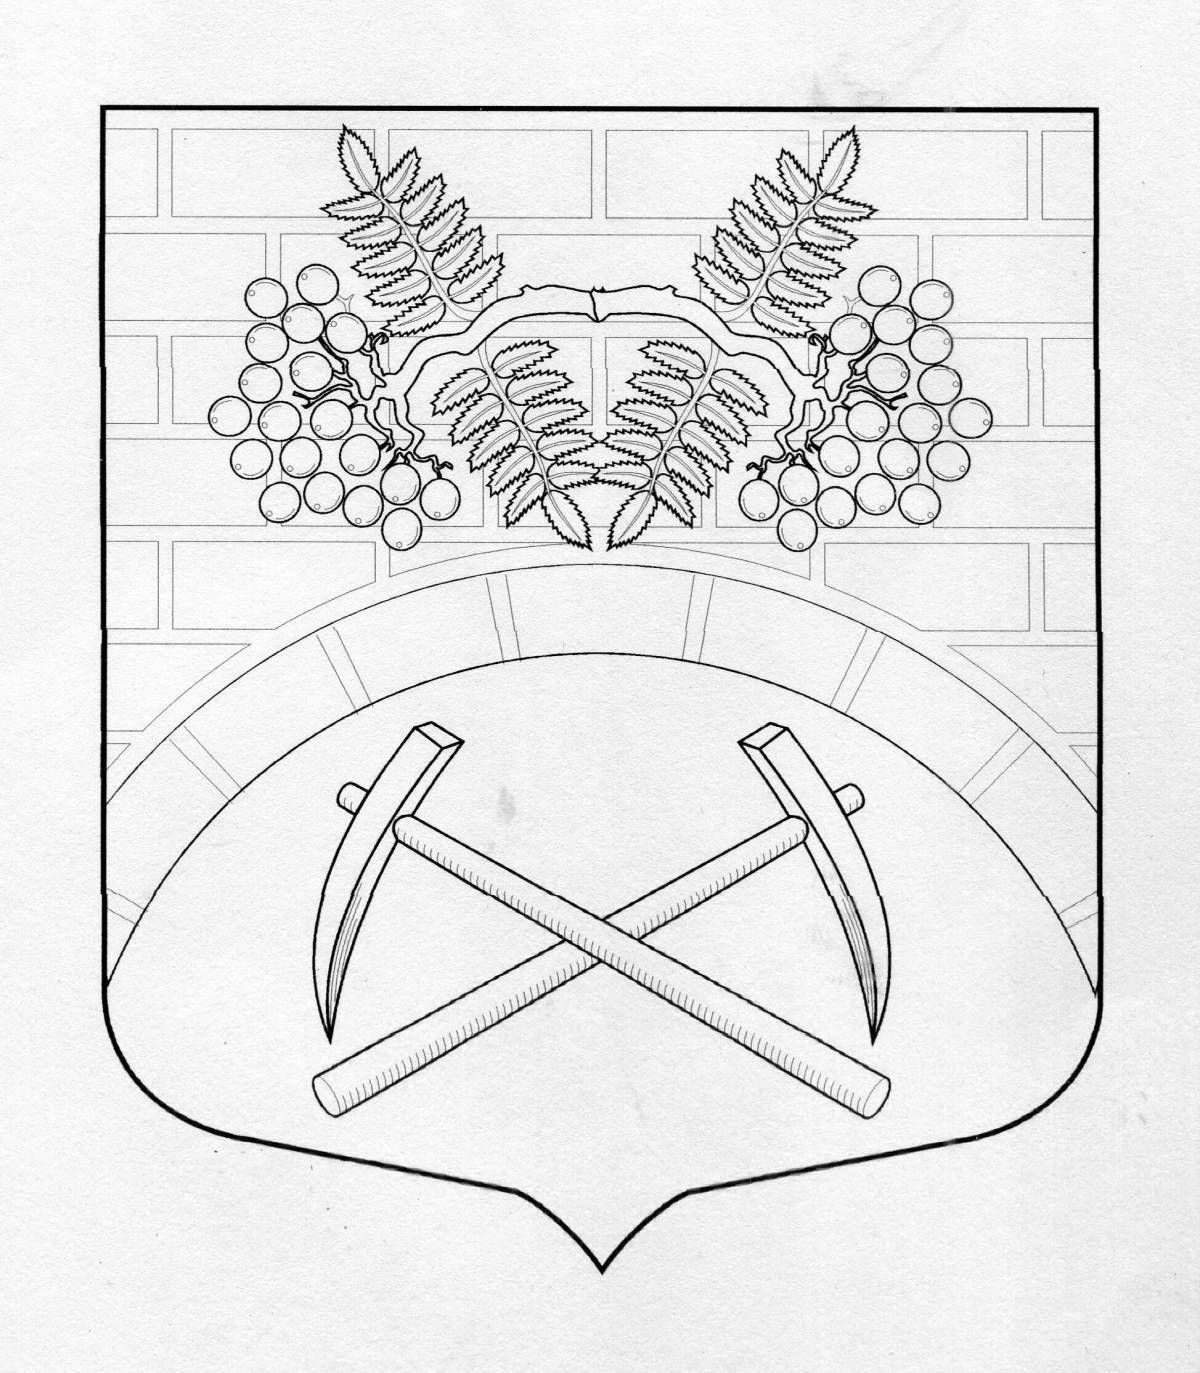 Coloring page elevated coat of arms of the Leningrad region